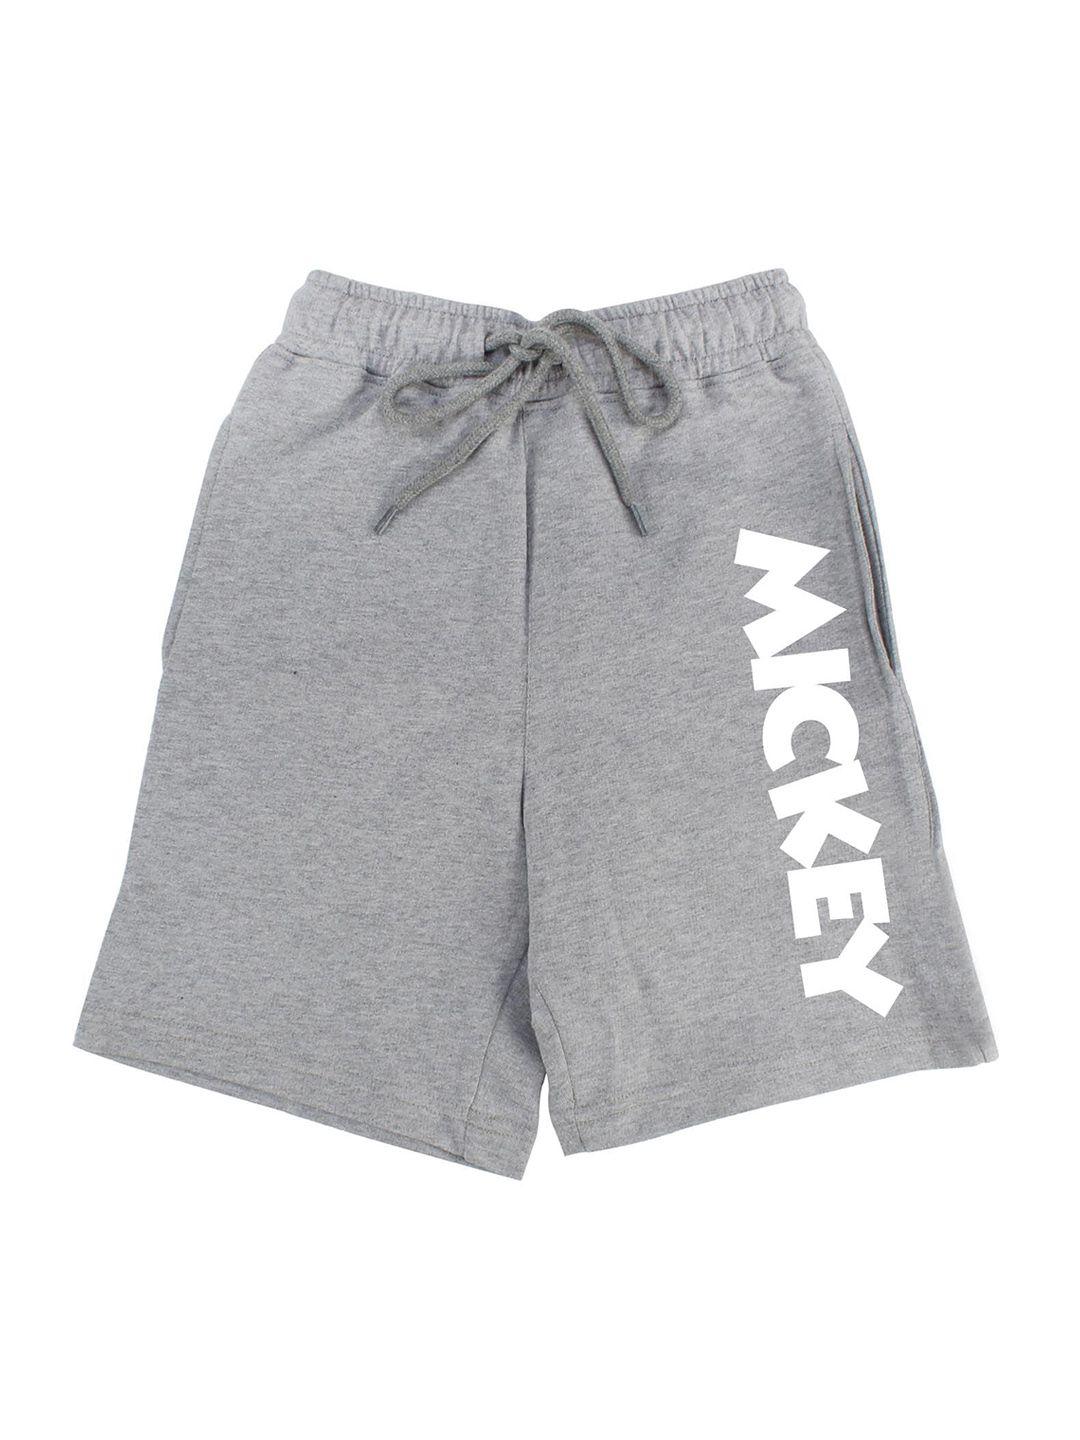 disney-by-wear-your-mind-boys-grey-typography-printed-mickey-mouse-shorts